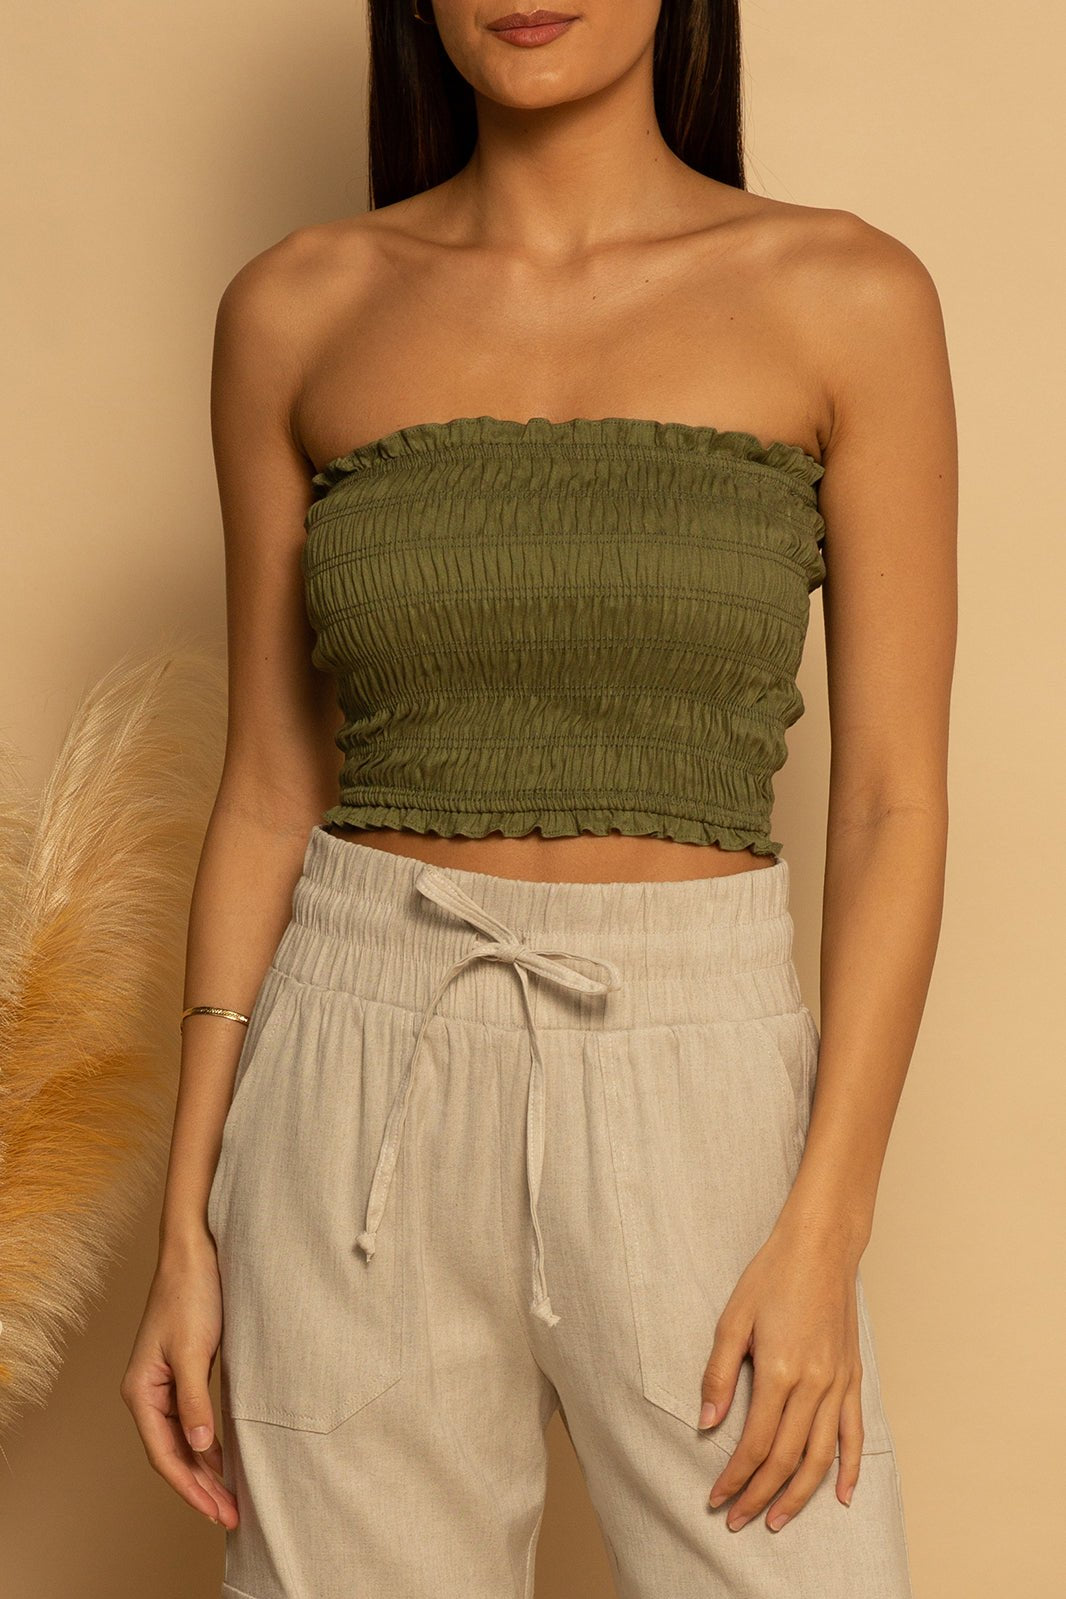 SMOCKED TUBE TOP - FOREST GREEN - XS